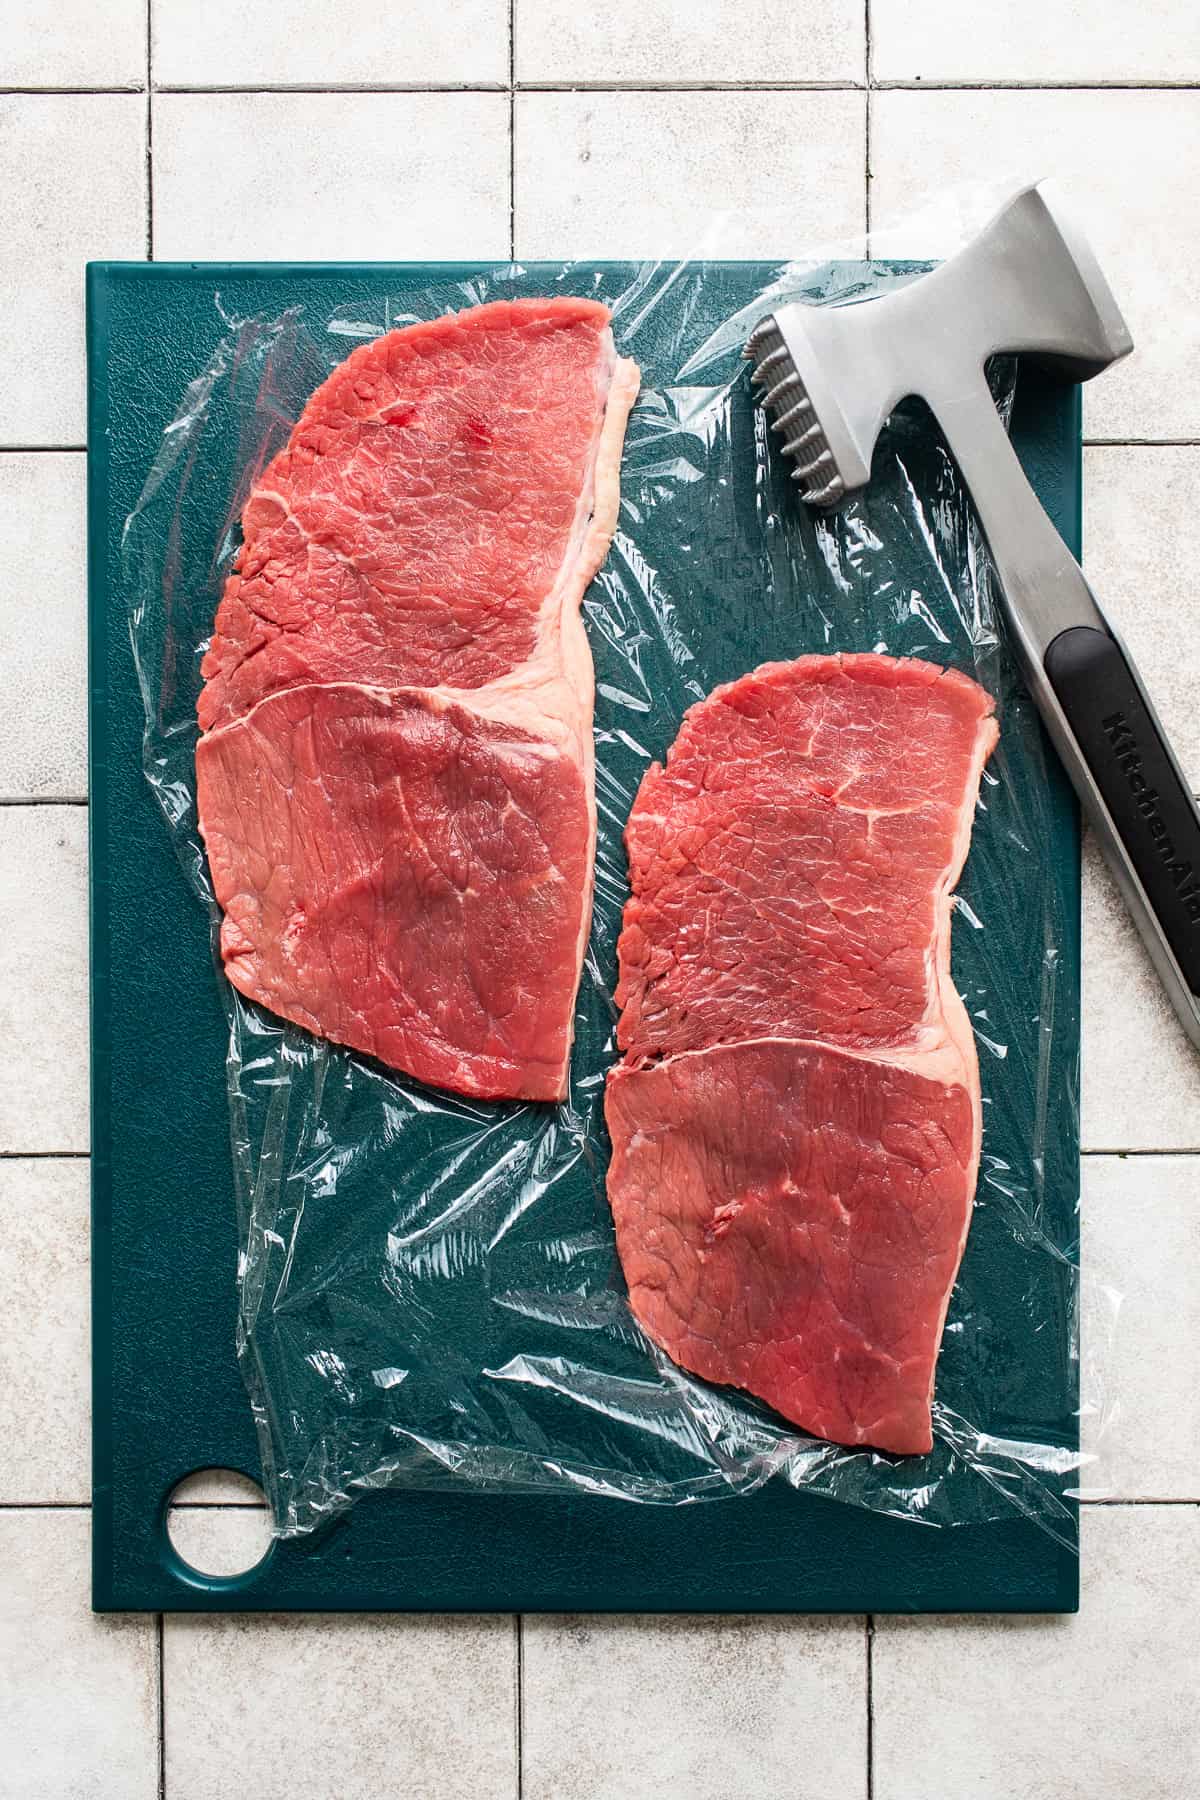 Thinly sliced steak that has been pounded with a meat mallet on a cutting board lined with plastic wrap.